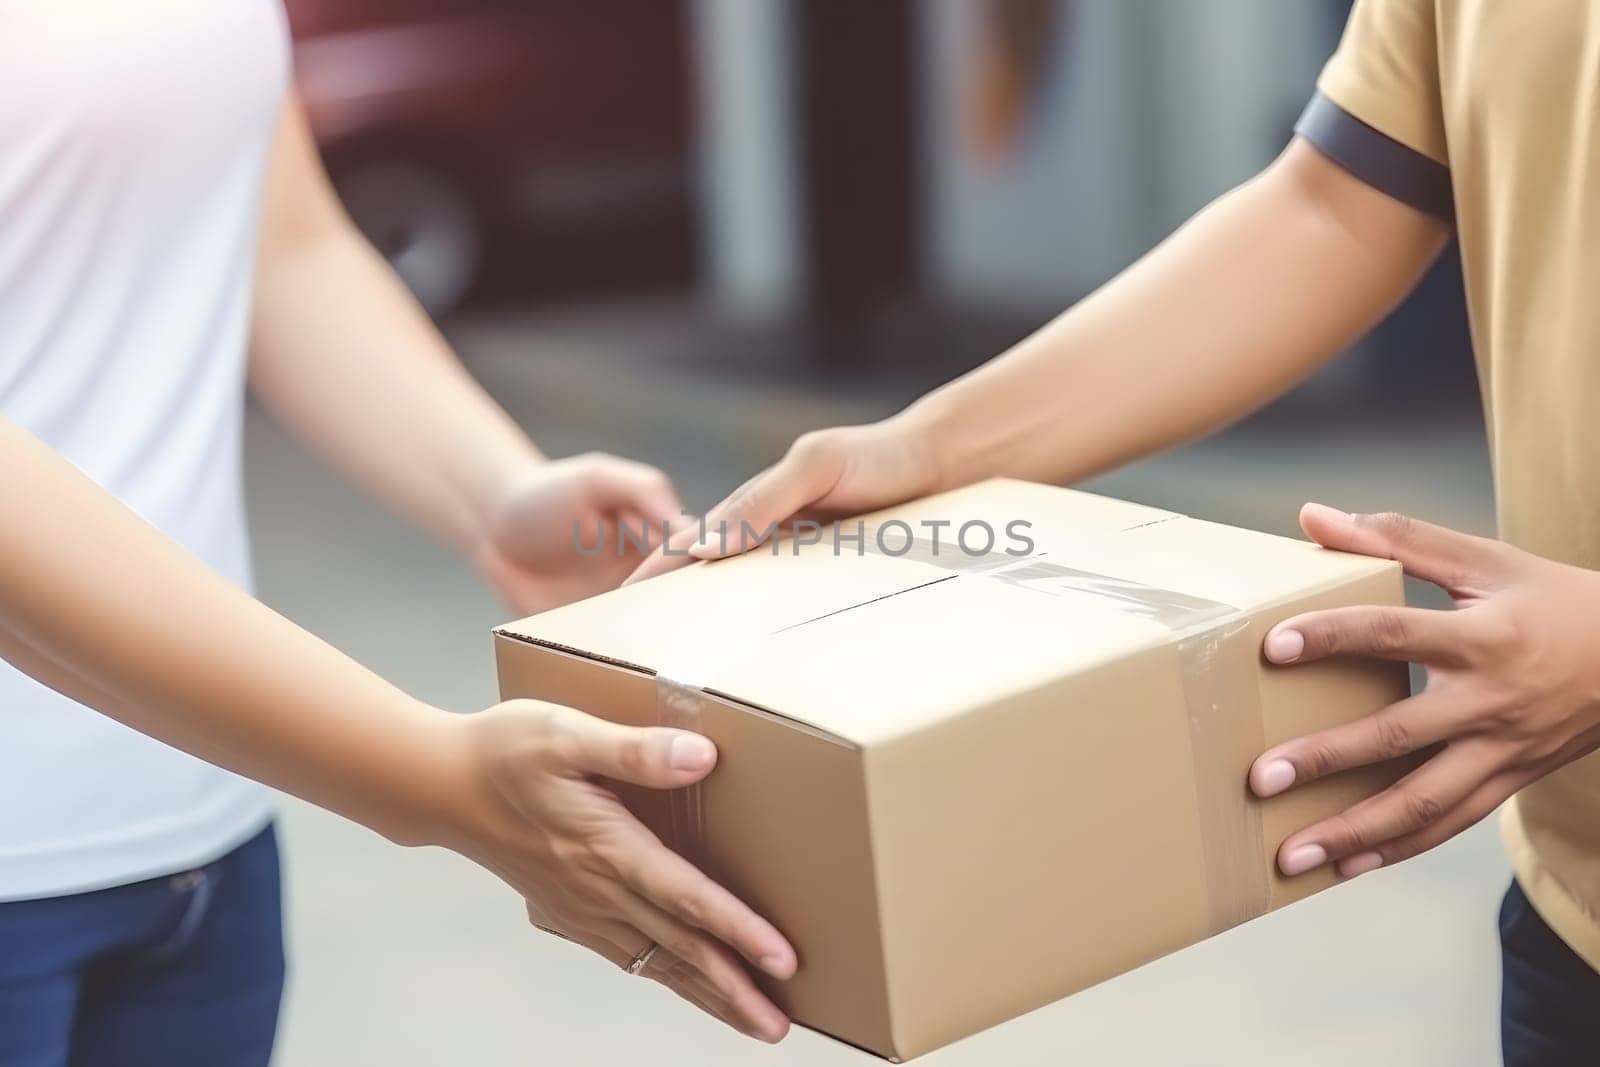 caucasian hands accepting a delivery of boxes, neural network generated photorealistic image by z1b